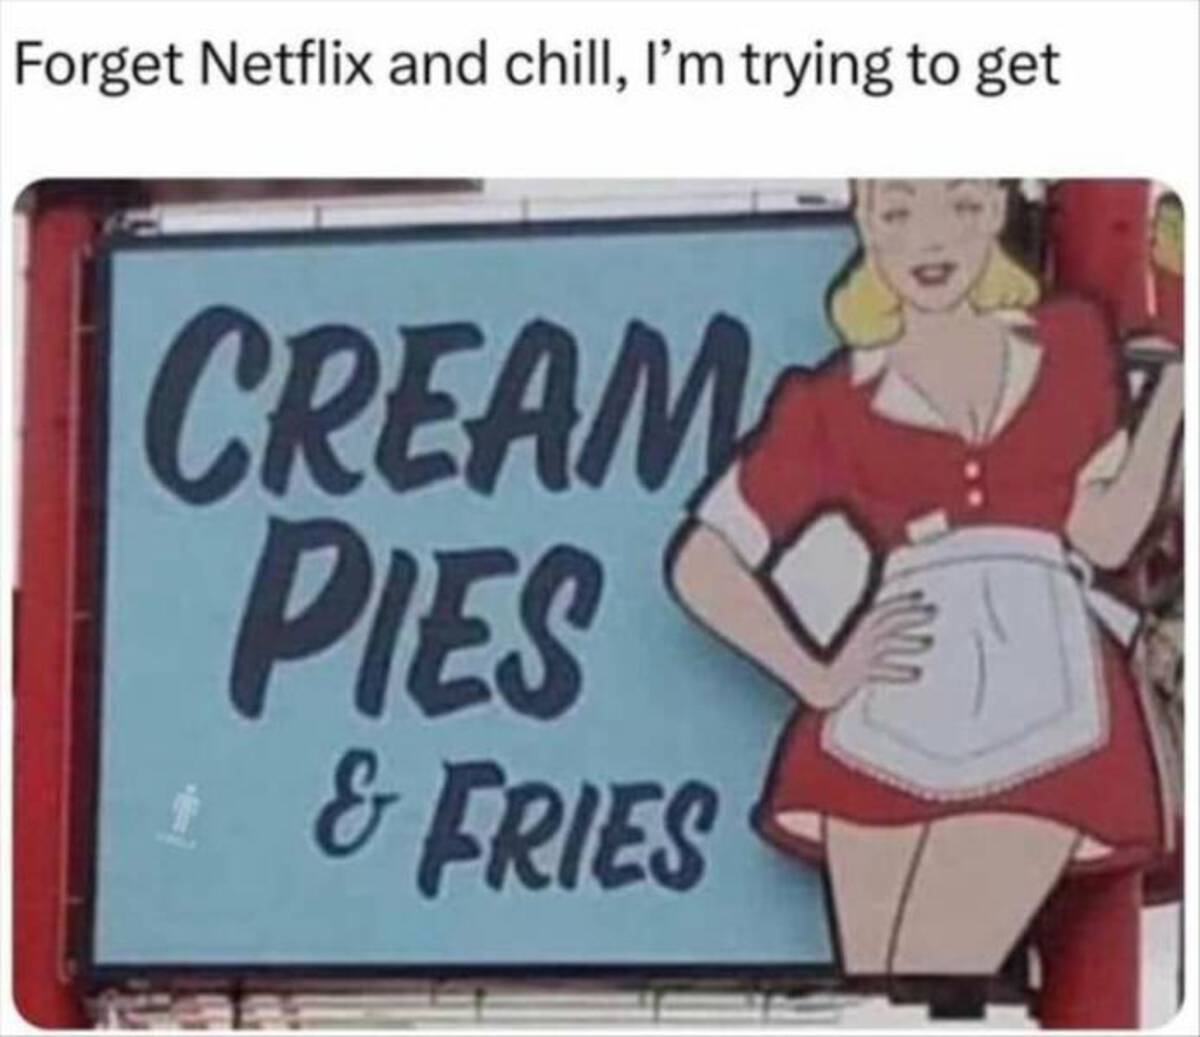 Meme - Forget Netflix and chill, I'm trying to get Cream Pies & Fries